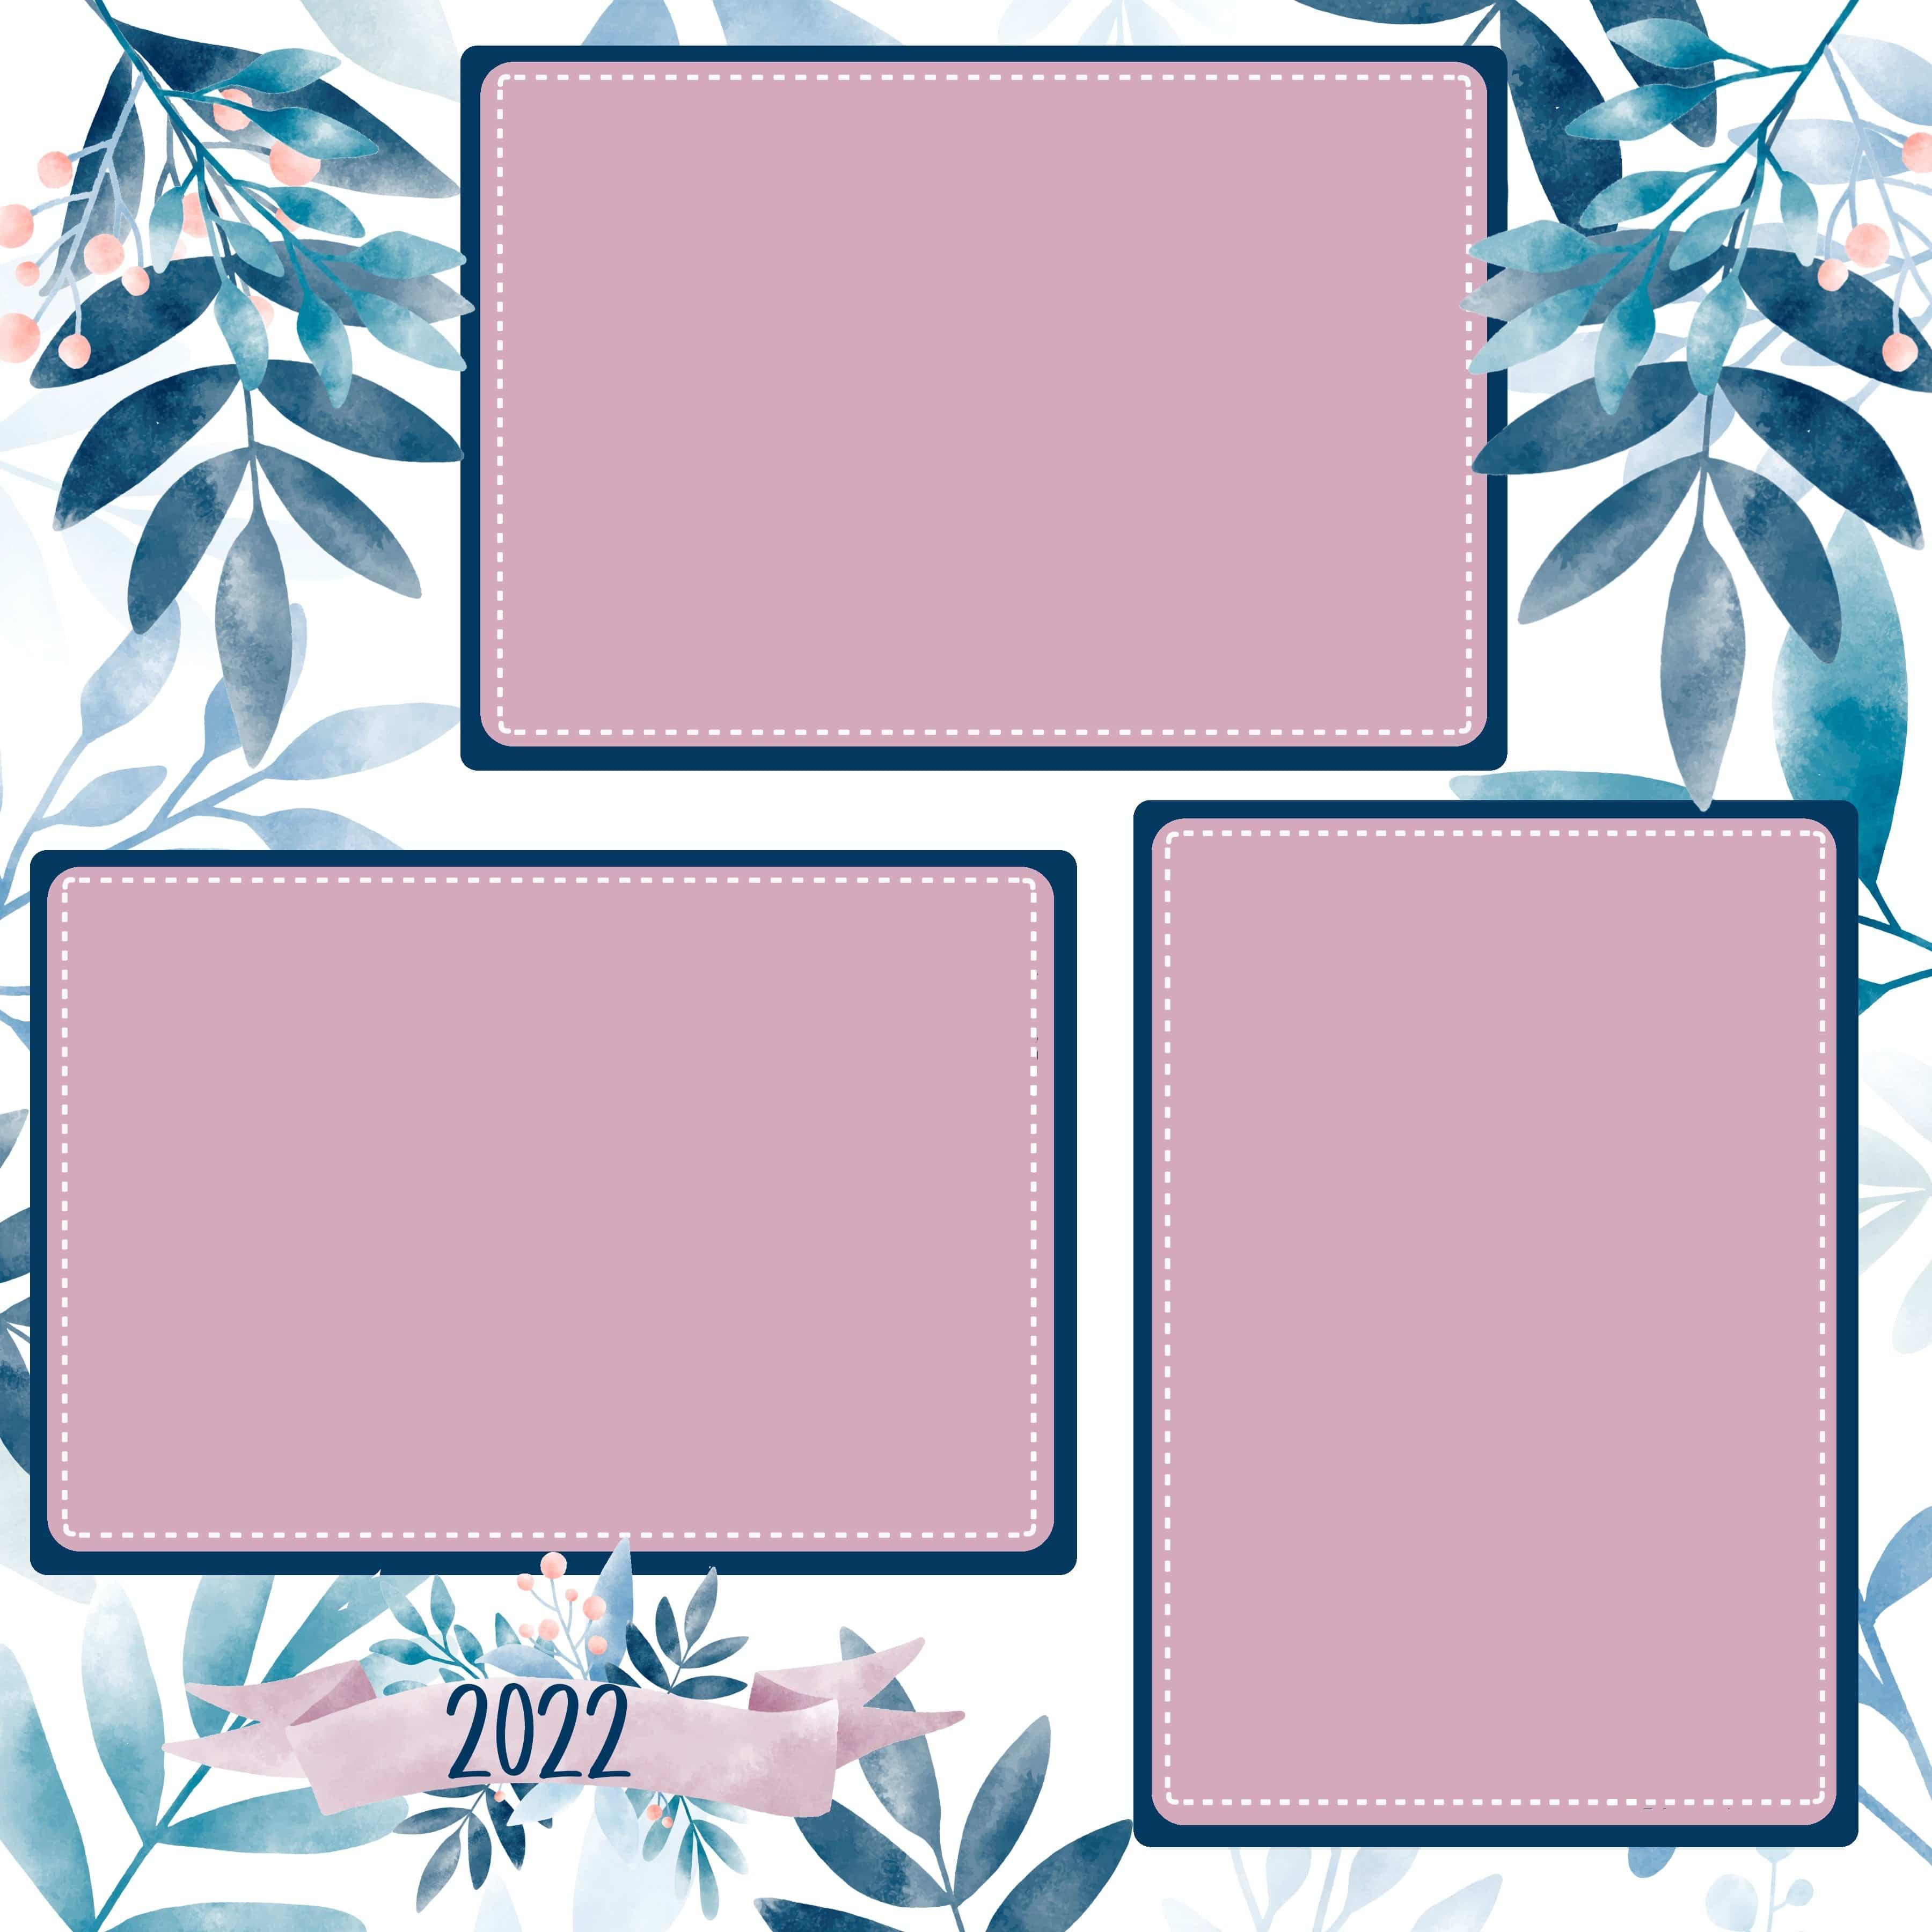 Mother's Day 2022 (2) - 12 x 12 Premade, Printed Scrapbook Pages by SSC Designs - Scrapbook Supply Companies